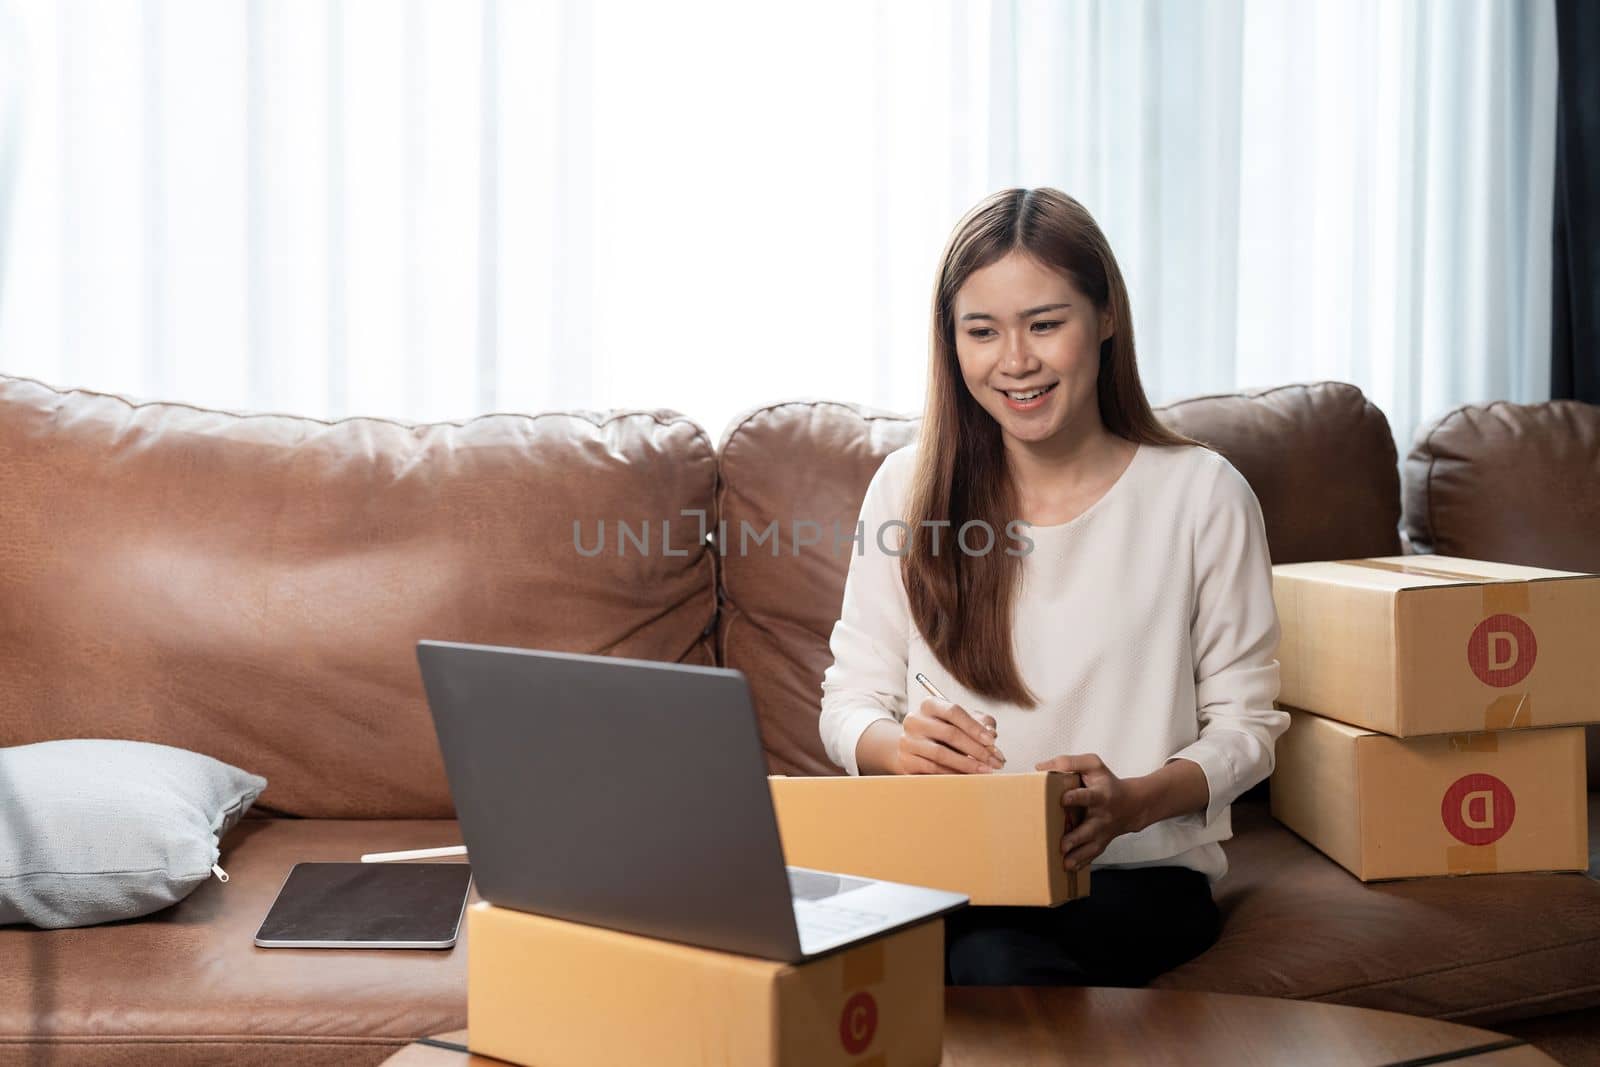 Portrait asian woman packing box. small business owner in home office, online sell marketing delivery, SME e-commerce telemarketing Startup small business entrepreneur concept.